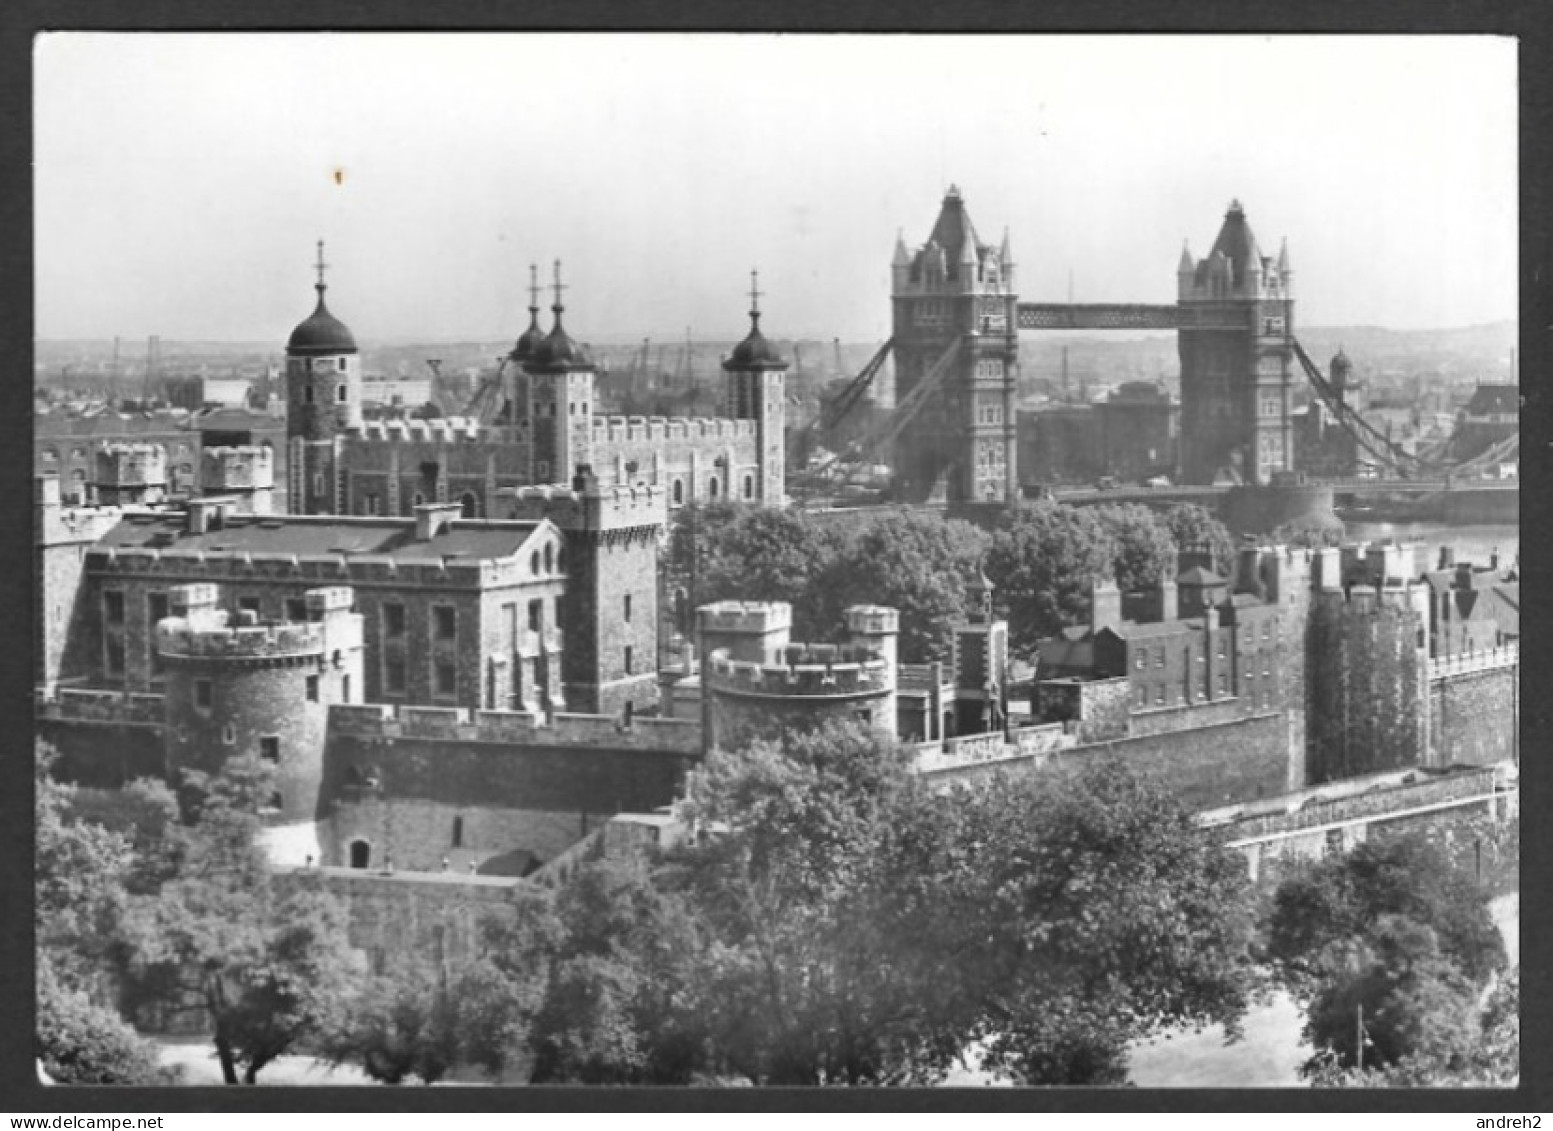 Angleterre > London > C.P.A.  Tower Of London - General View From North West - By Crown Copyright - Tower Of London